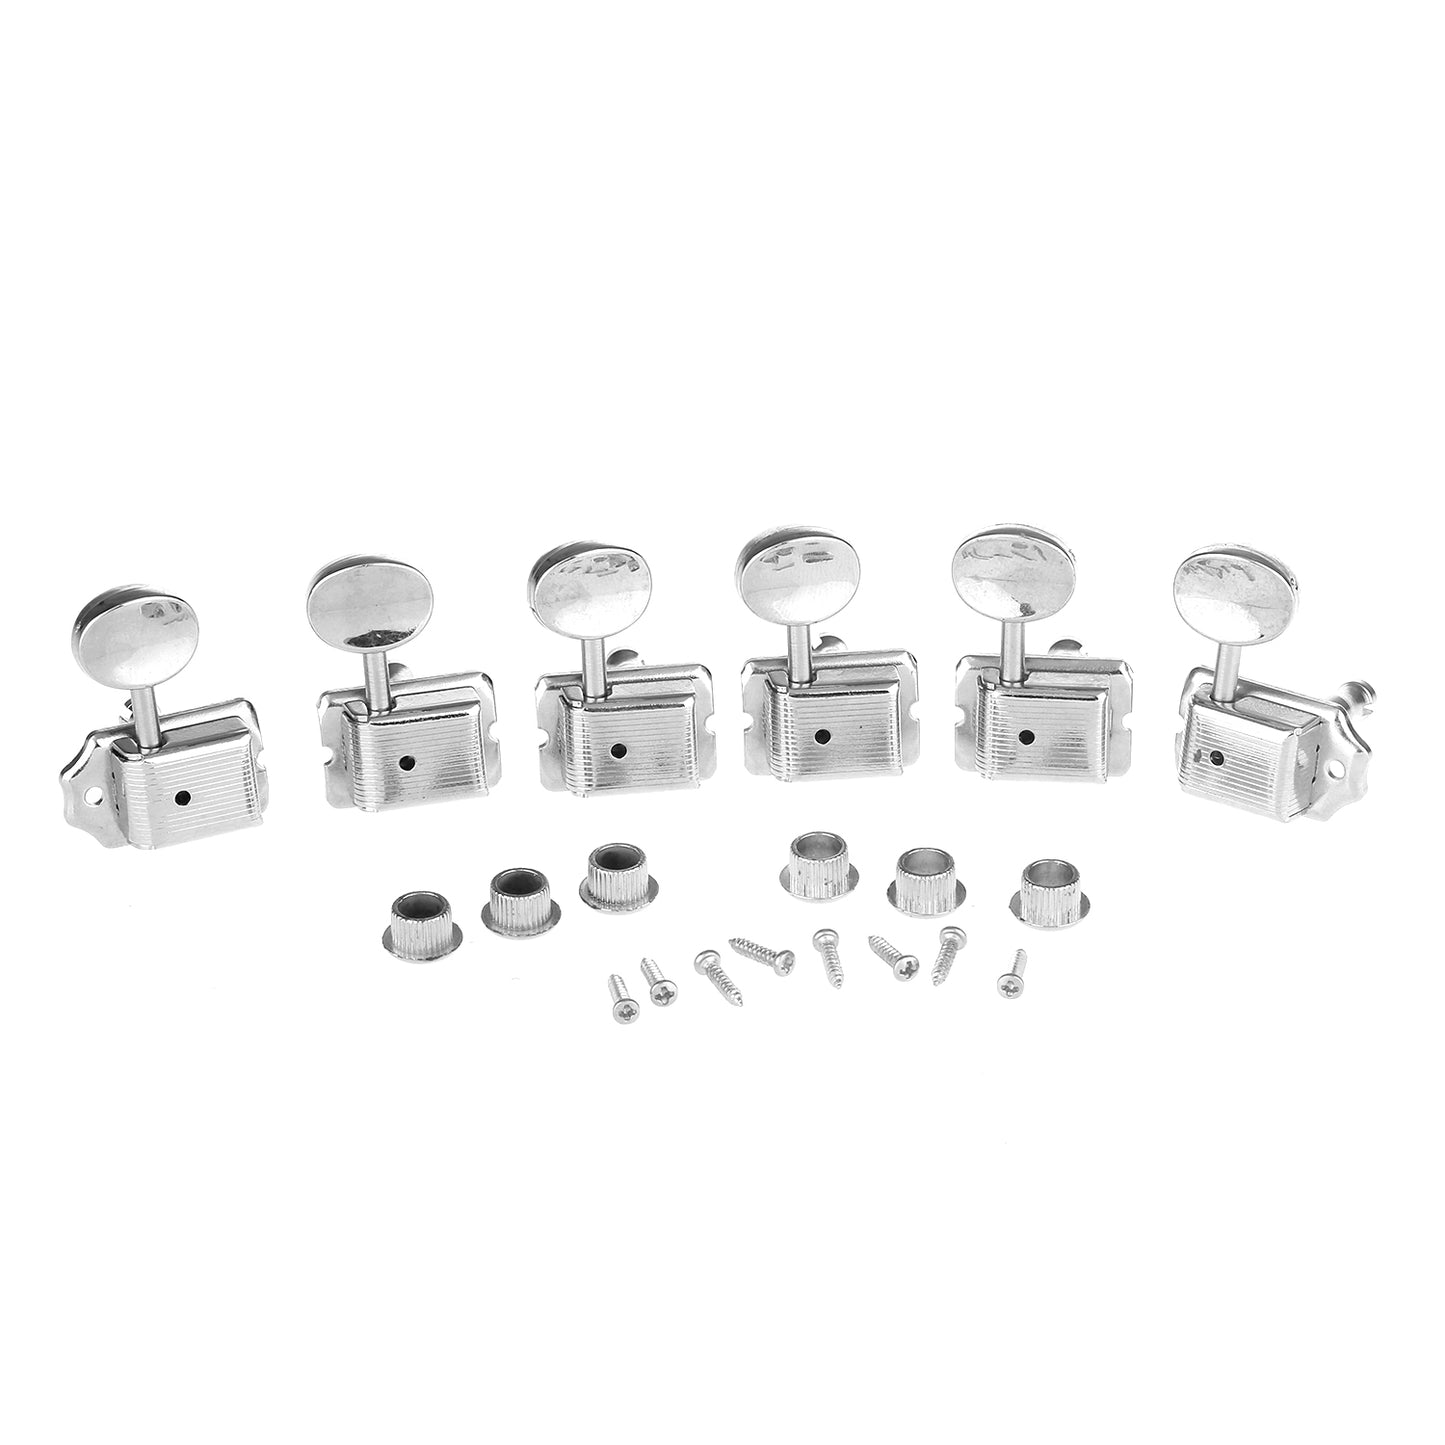 Musiclily Vintage Style 6 in Line Guitar Tuners Tuning Pegs Keys  Machine Heads for Strat or Squier Style, Nickel